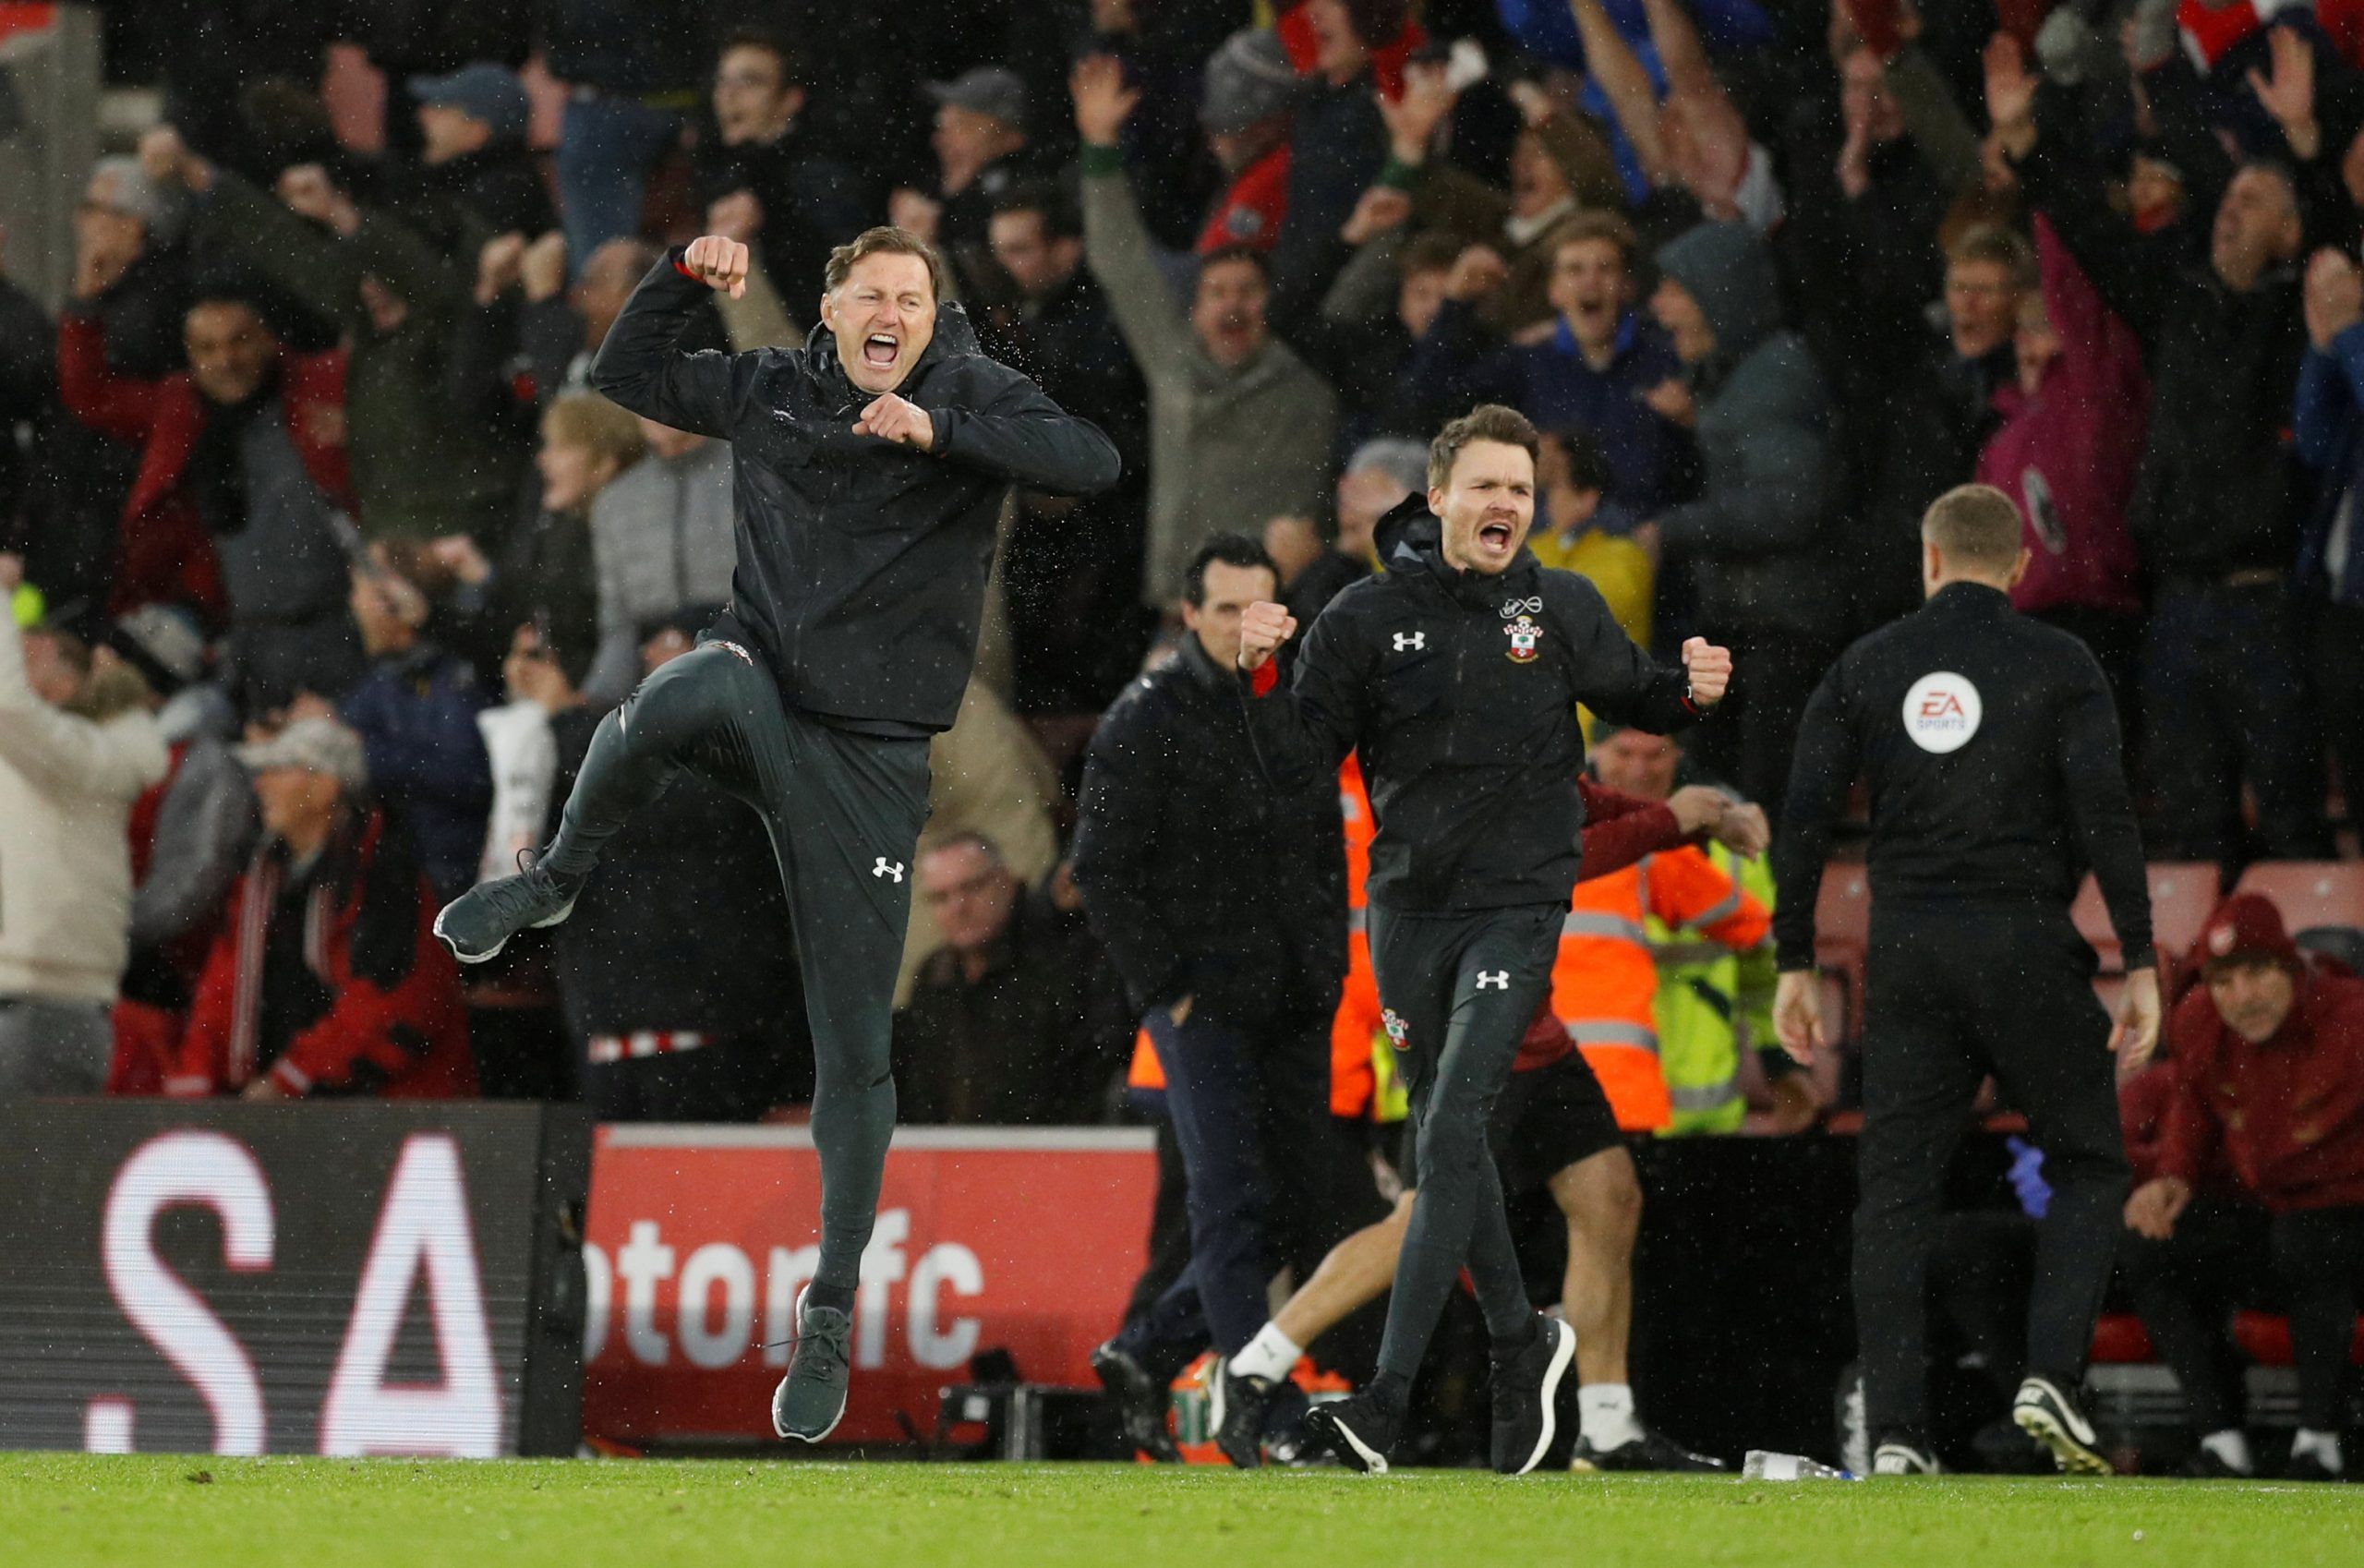 Soccer Football - Premier League - Southampton v Arsenal - St Mary's Stadium, Southampton, Britain - December 16, 2018  Southampton manager Ralph Hasenhuttl celebrates at the end of the match as Arsenal manager Unai Emery looks dejected   Action Images via Reuters/John Sibley  EDITORIAL USE ONLY. No use with unauthorized audio, video, data, fixture lists, club/league logos or 